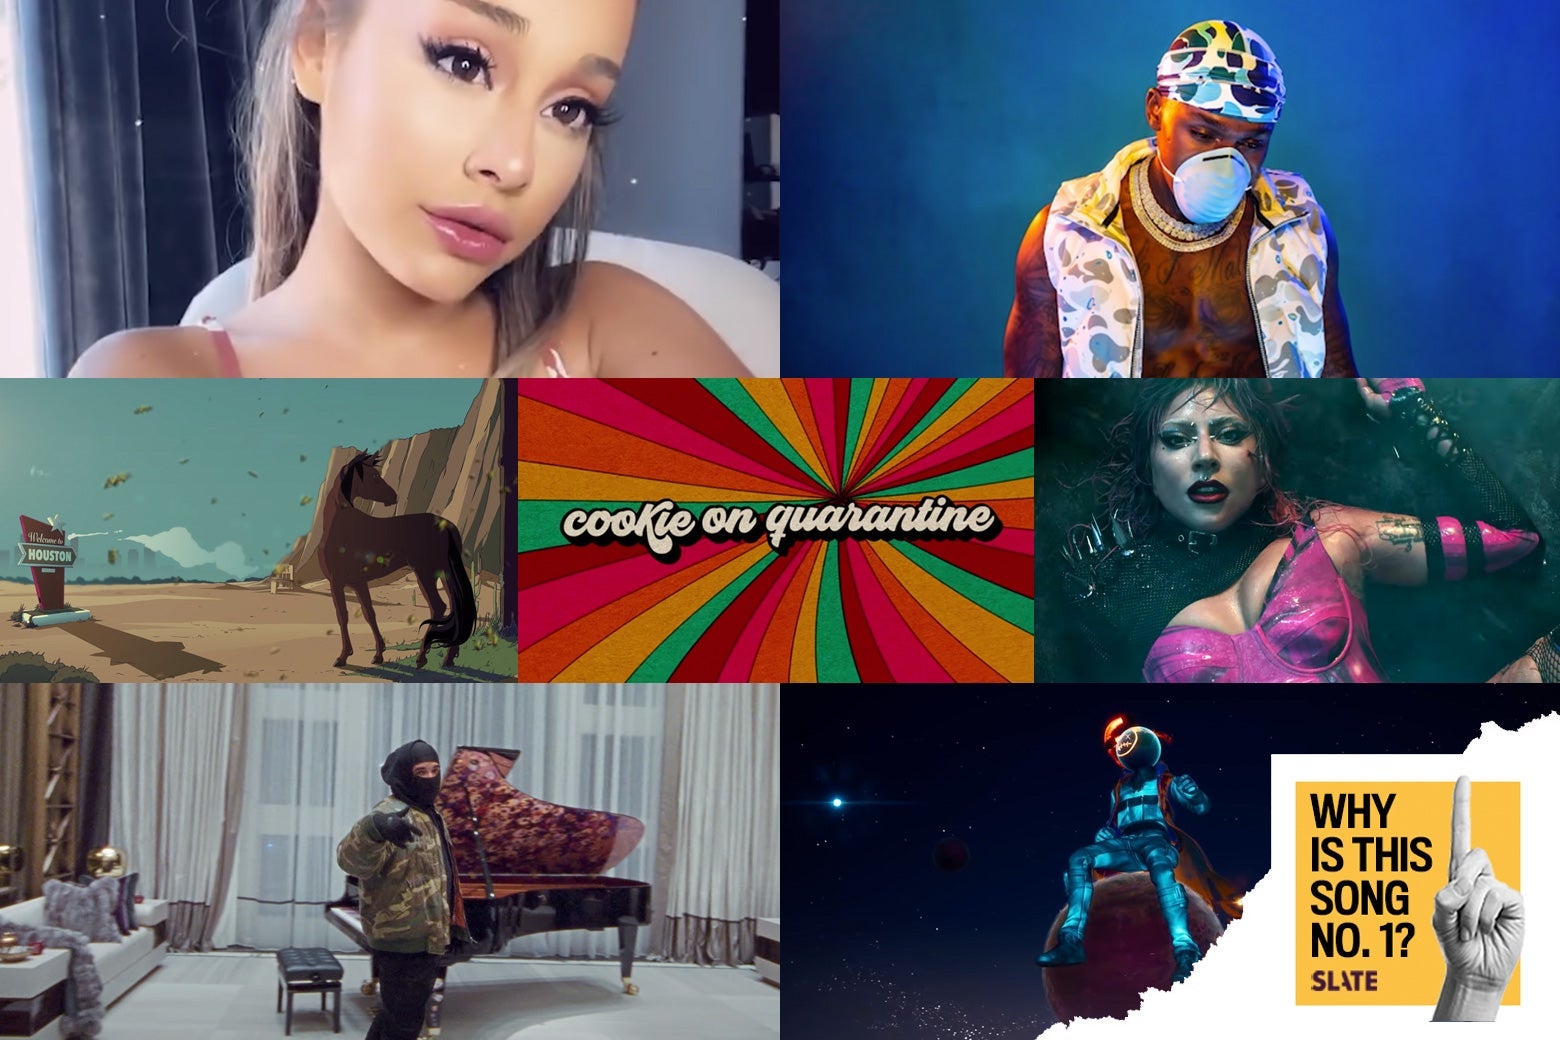 Stills from the official YouTube uploads for all seven songs show Ariana Grande, a stallion, Drake, DaBaby, Lady Gaga, and the Fortnite version of Travis Scott. In corner, the Why Is This Song No. 1 logo.